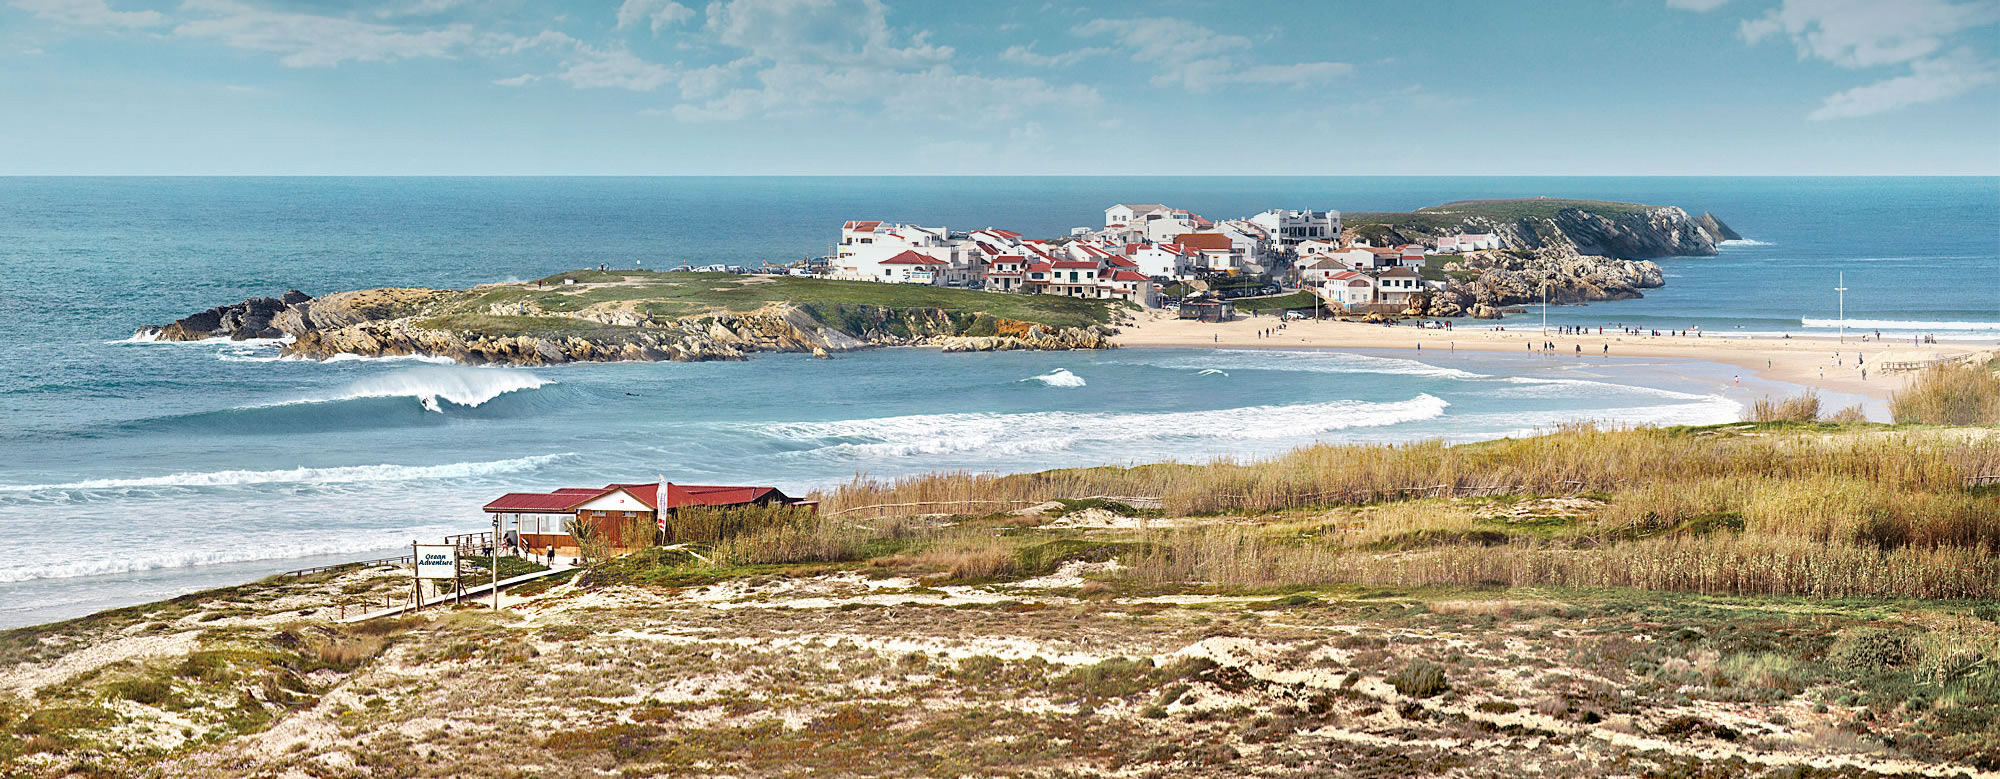 Surf Camps Portugal